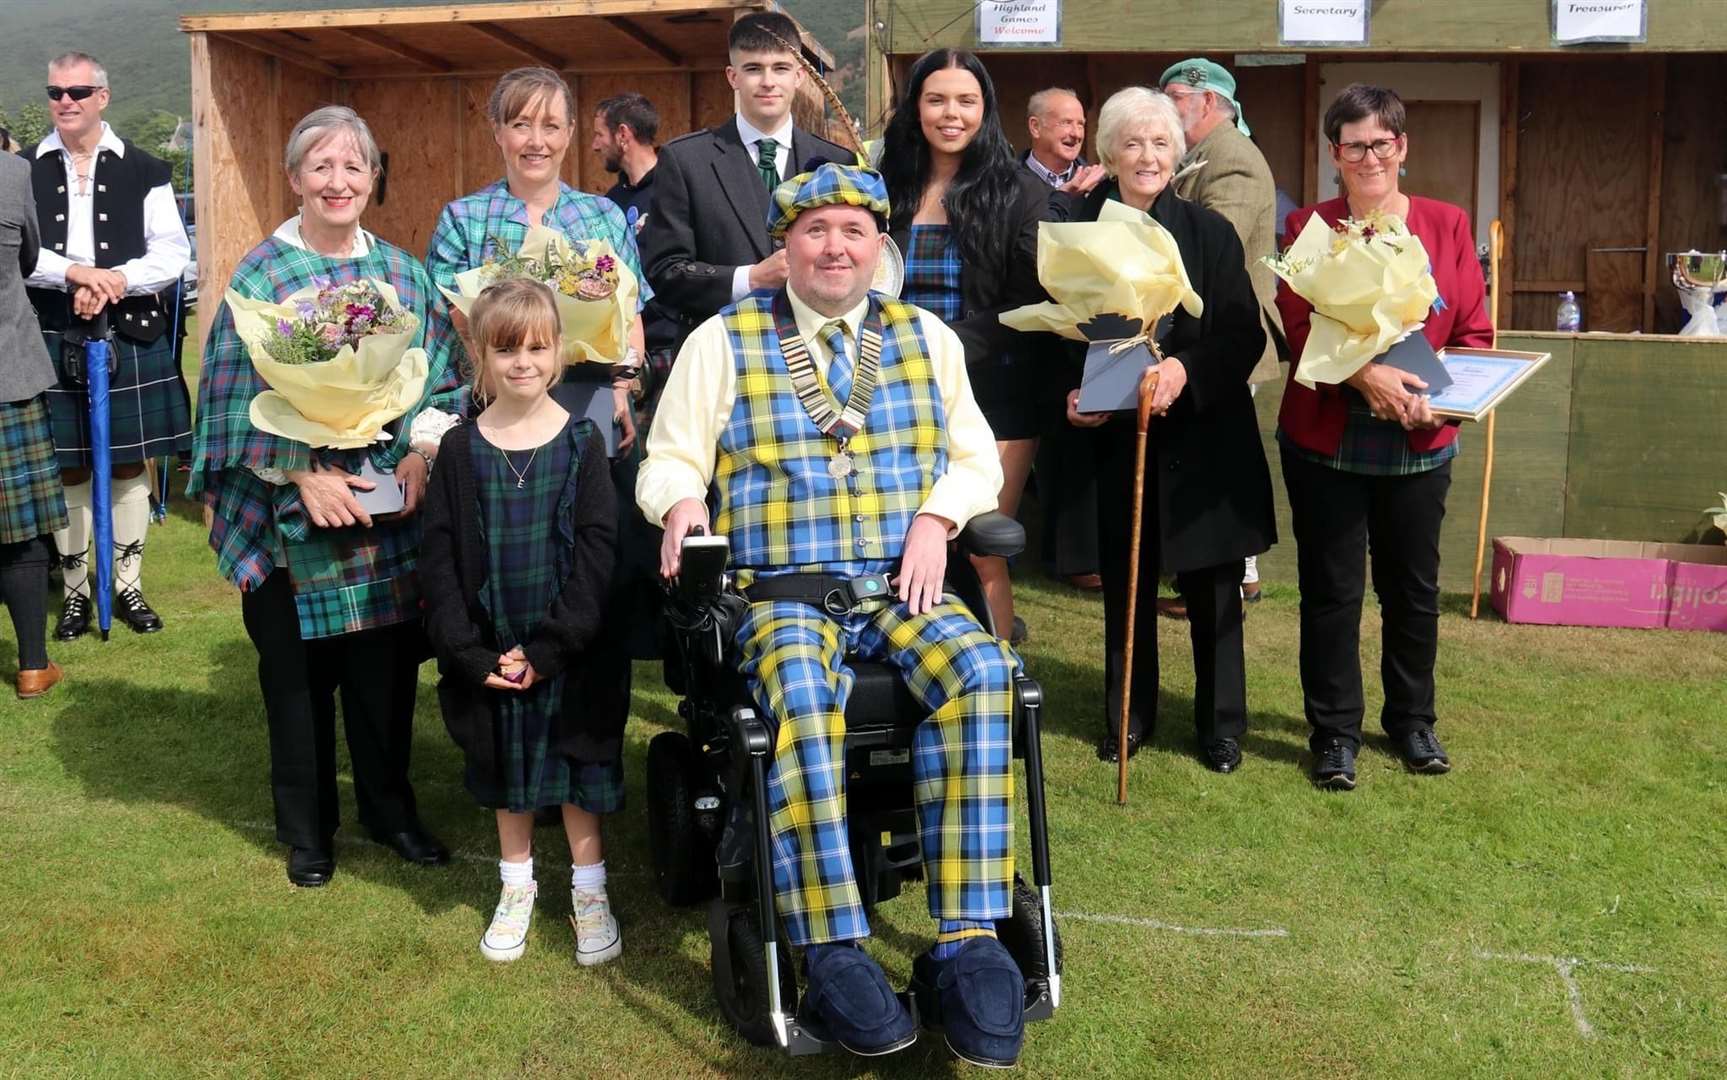 Chieftain Iain Whitehead (centre) with, from left, Edie Whitehead, Sharon Whitehead, Donnie Ross, Lorna Macrae, Christine Cowie, Fiona Sutherland and flower girl Elle Withey.